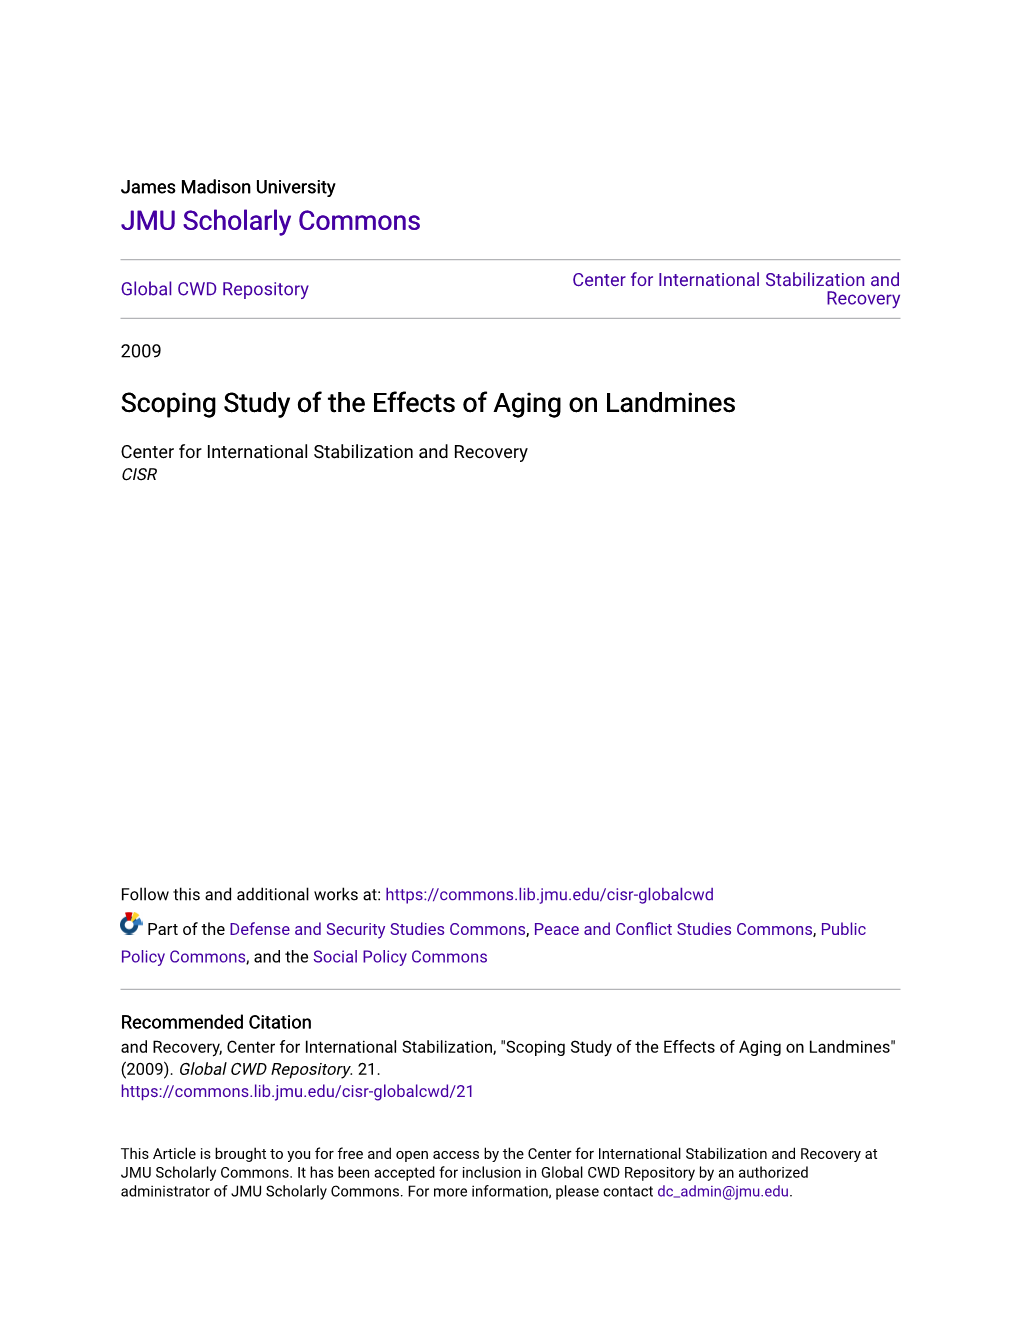 Scoping Study of the Effects of Aging on Landmines